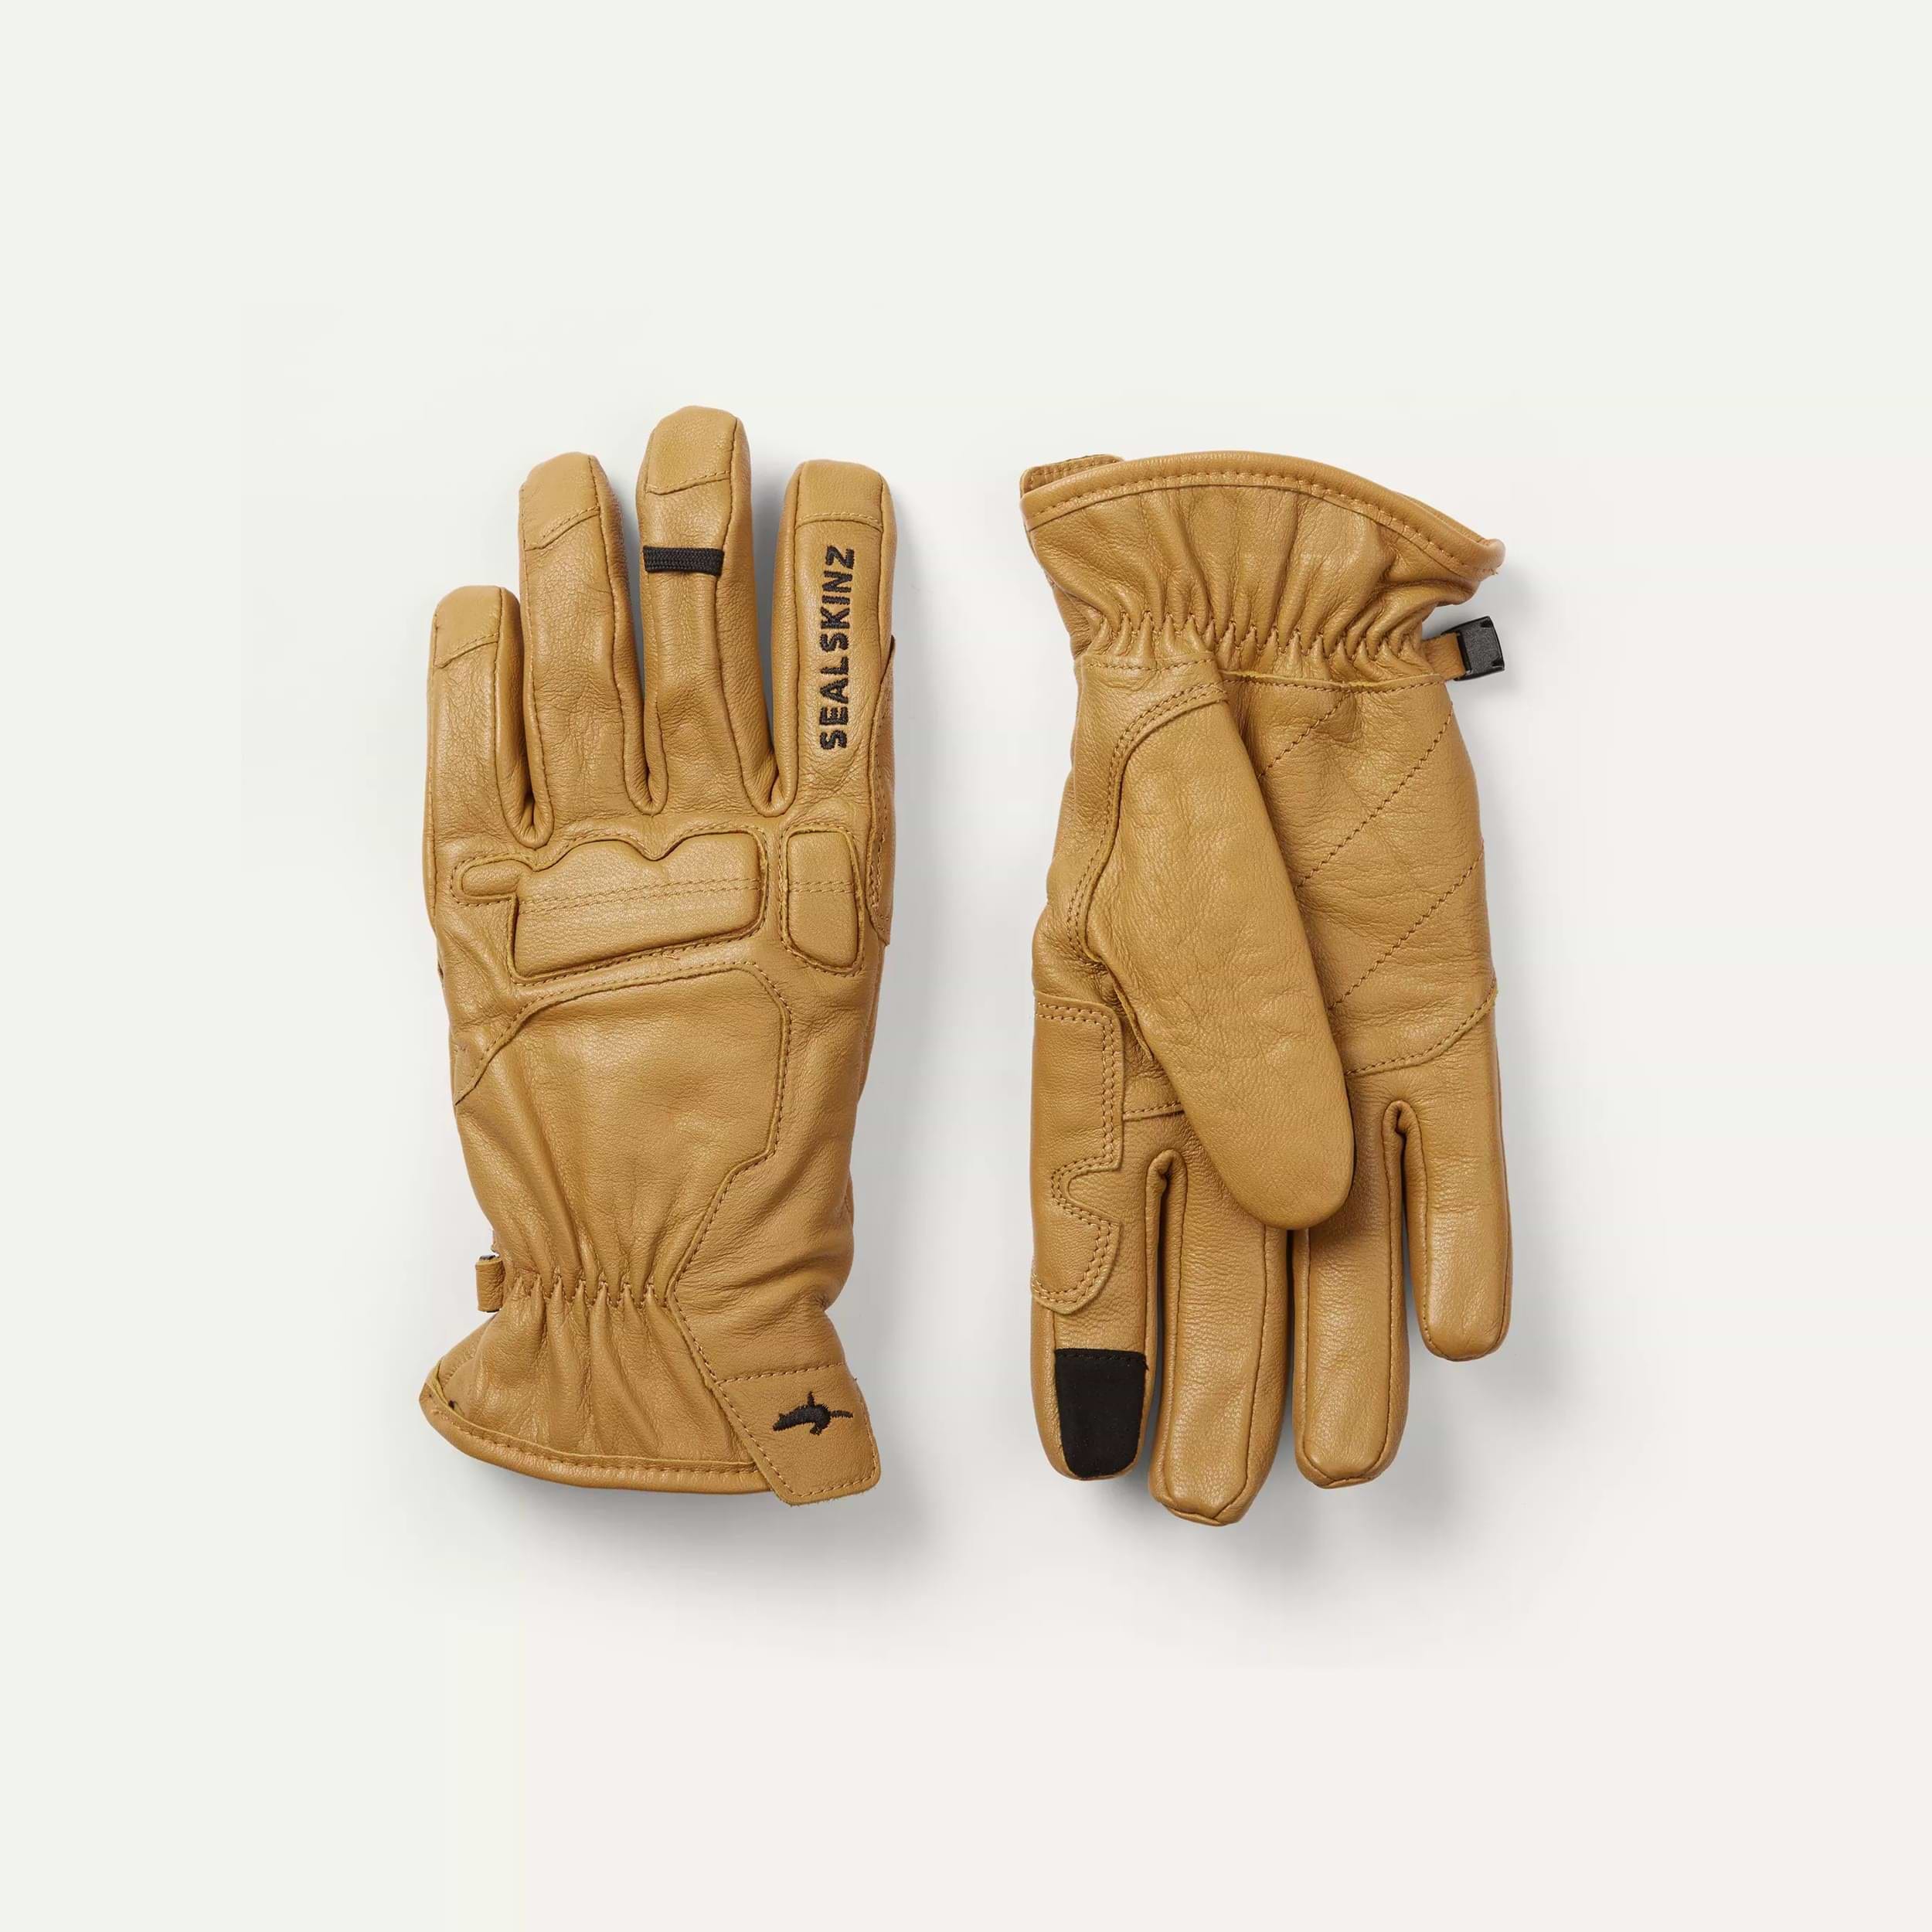 TFO Cold Weather Glove, Gear